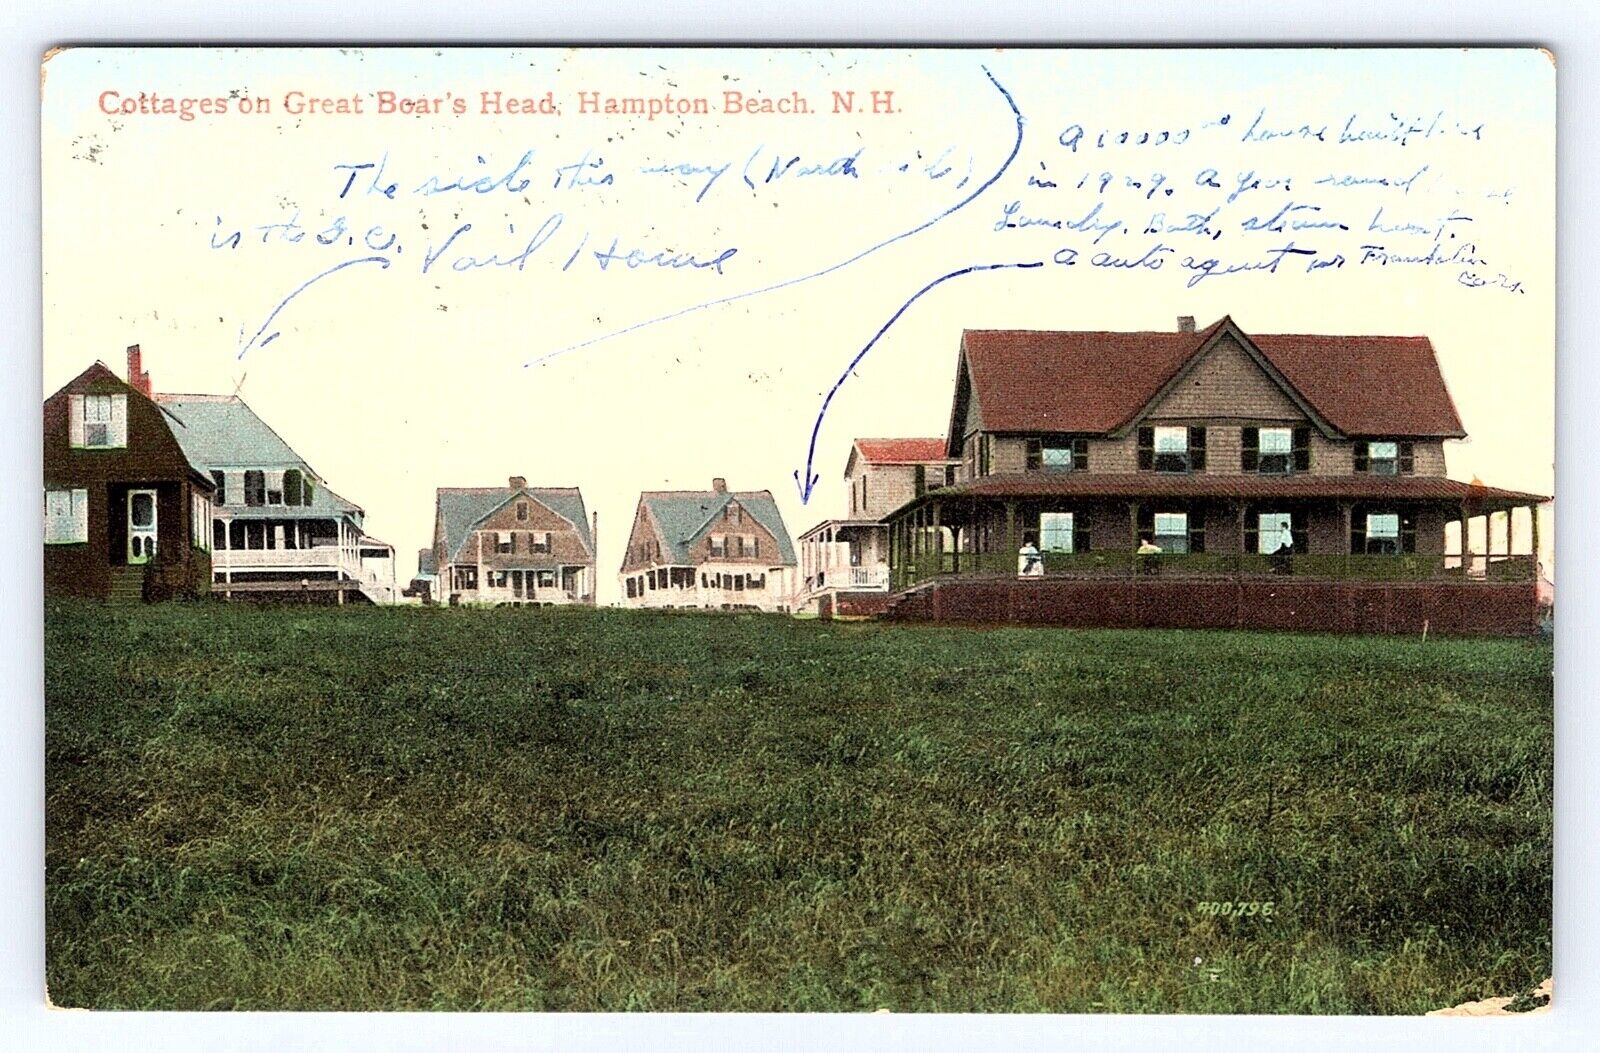 Vintage New Hampshire Cottages on Great Boar's Head, Hampton Beach, N.H. - c1915